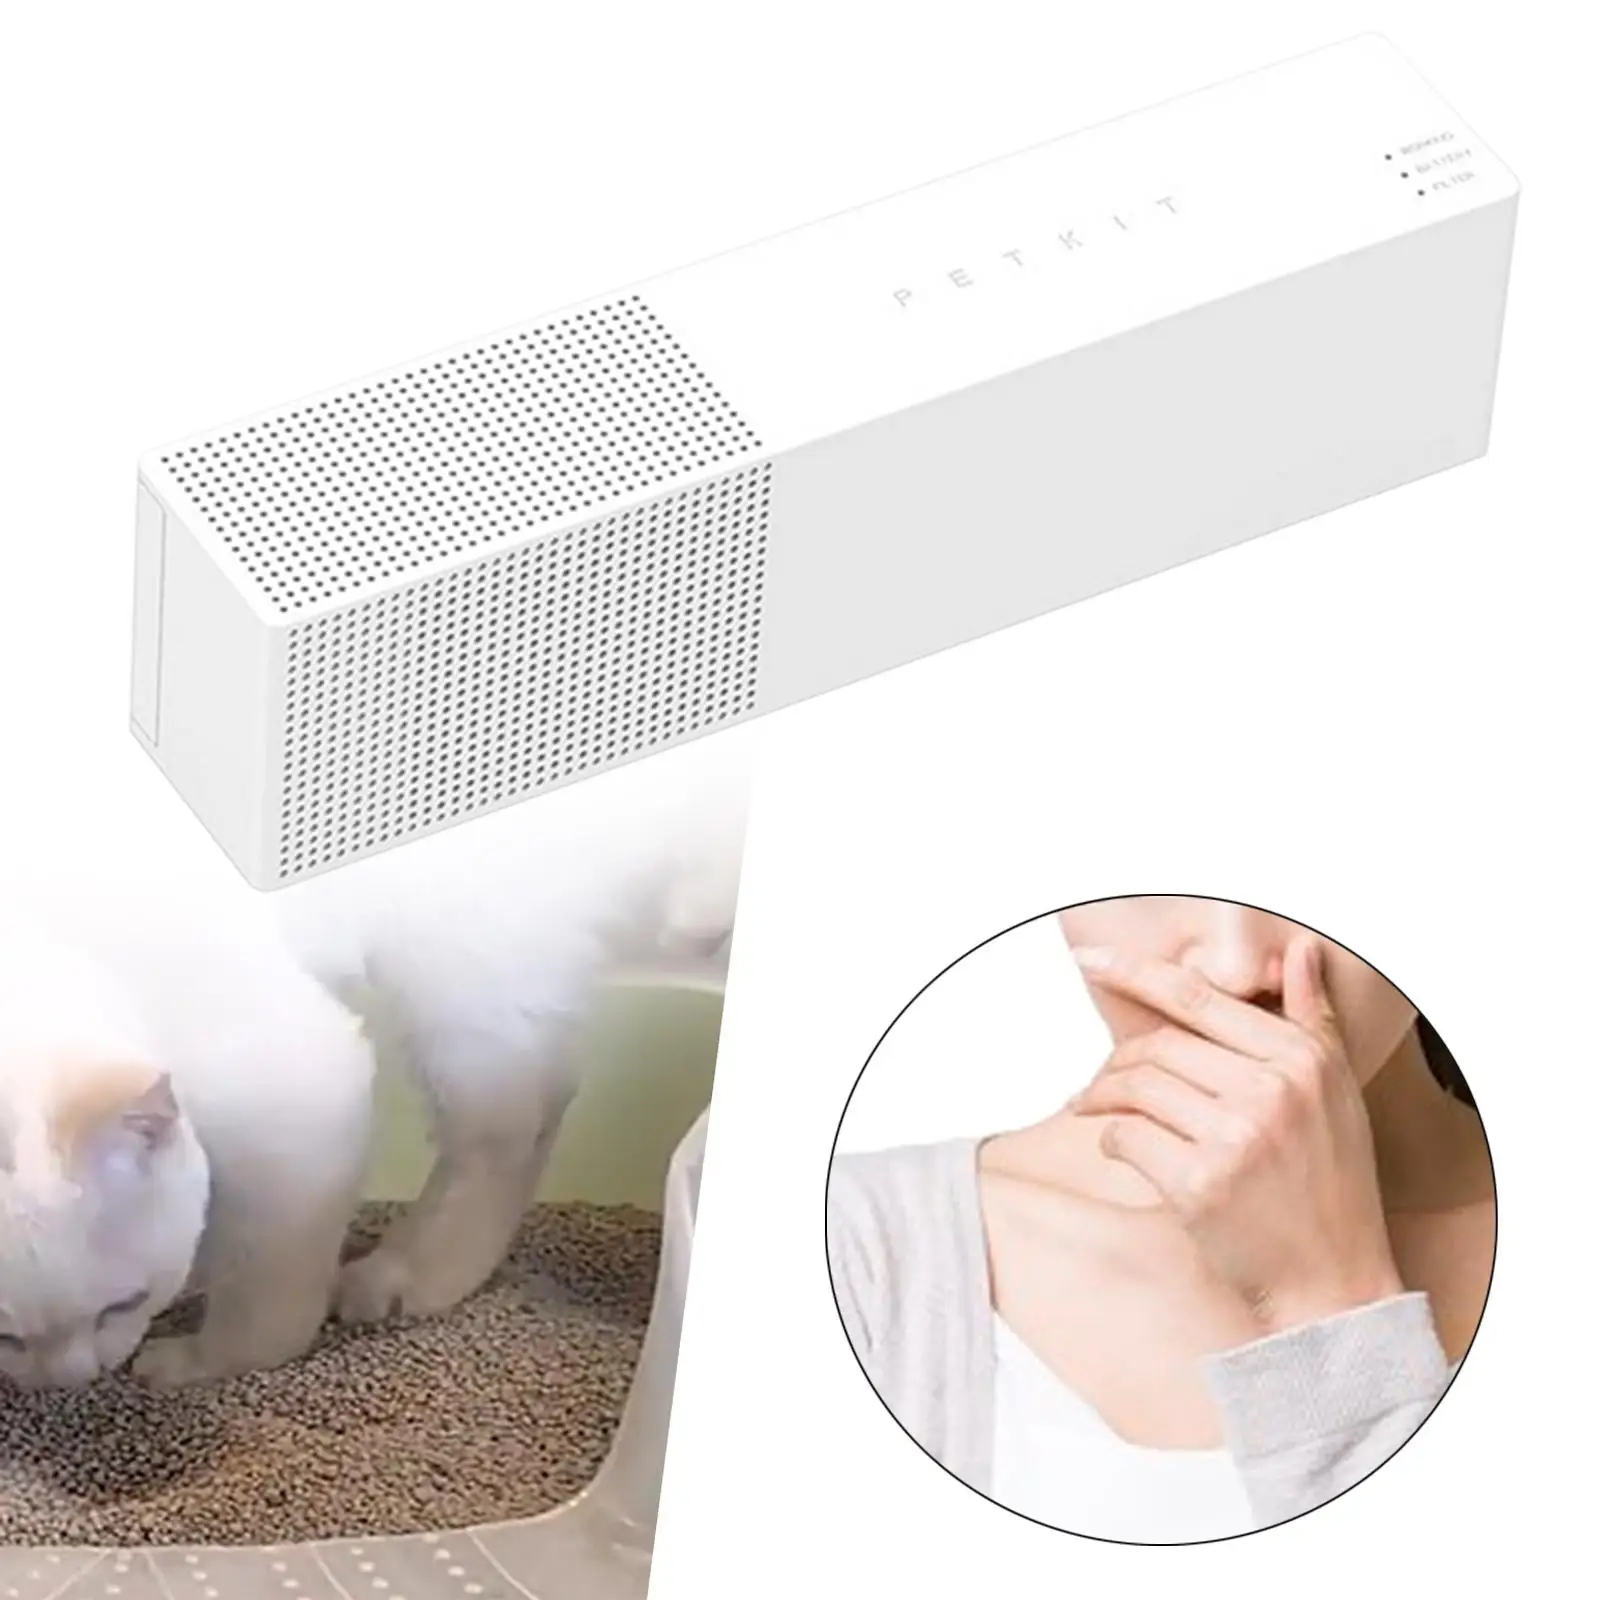 Smart Cat Odor Purifier Pets Deodorization Portable Wall Mount Low Noise Cat Litter Deodorizer Cats Smell Remover for Kitchen